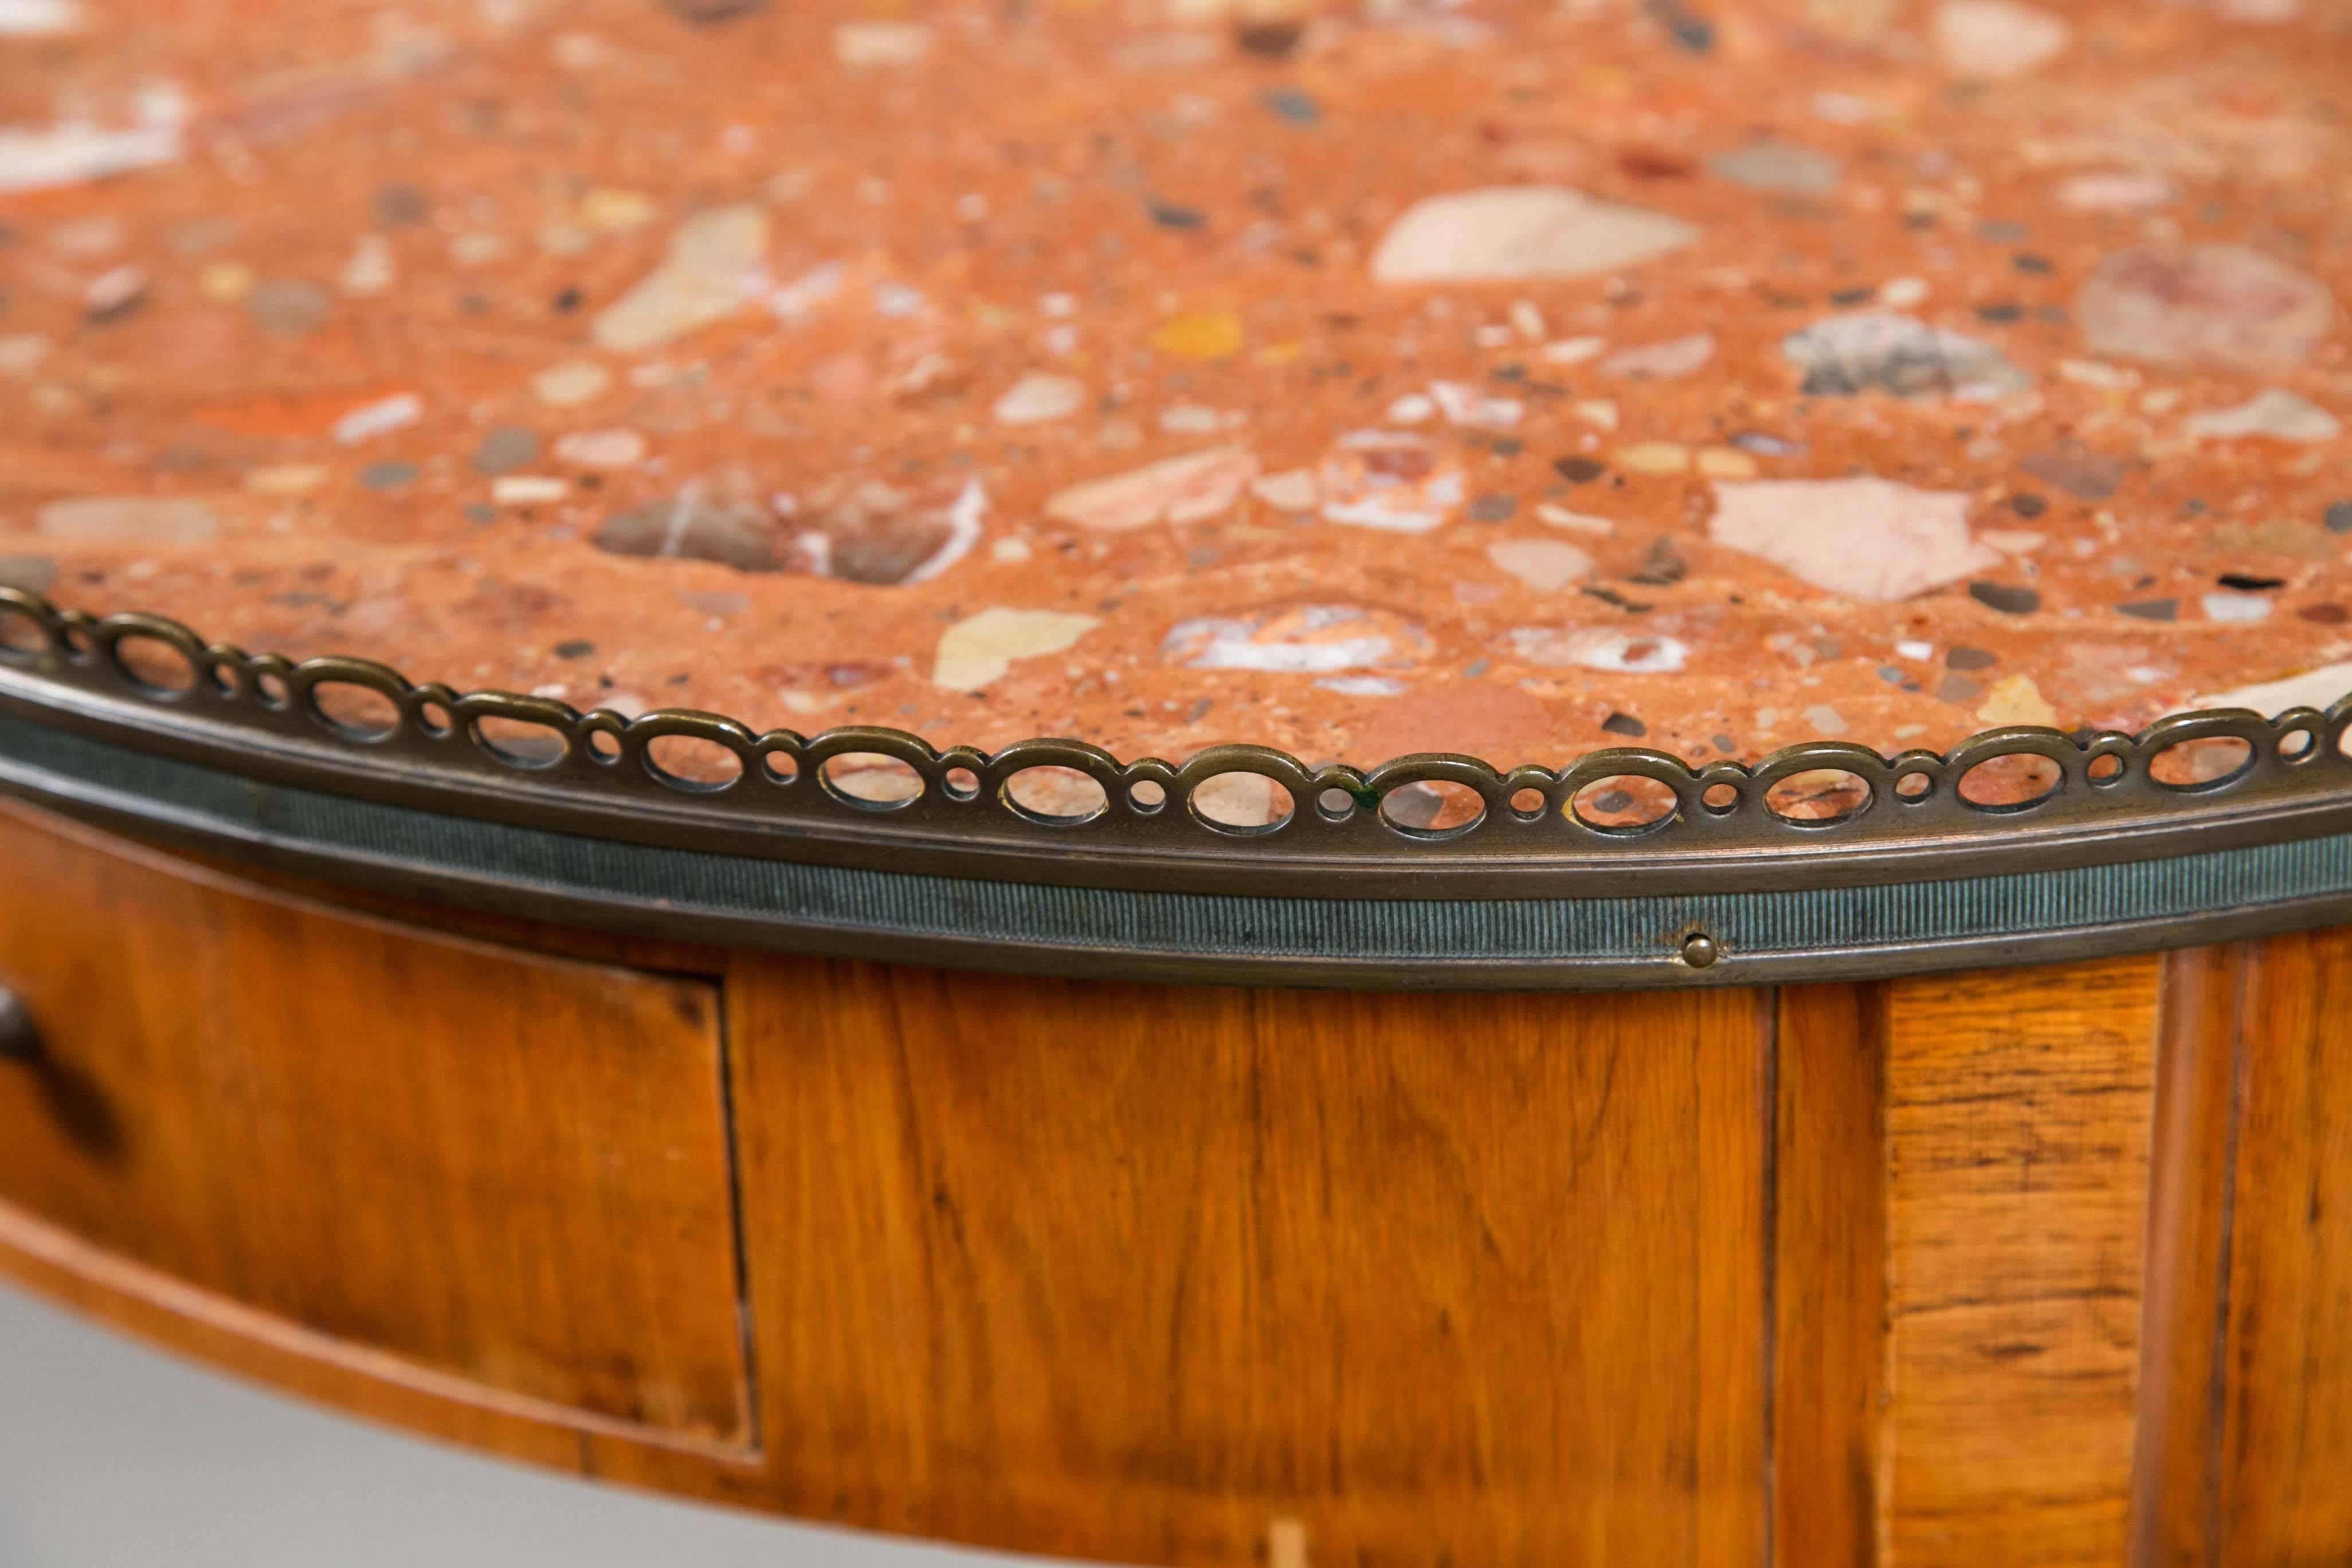 Dating from the late 19th century this table has a Rosso Verona marble top. There are two drawers on opposing sides and two leather topped pull-outs.